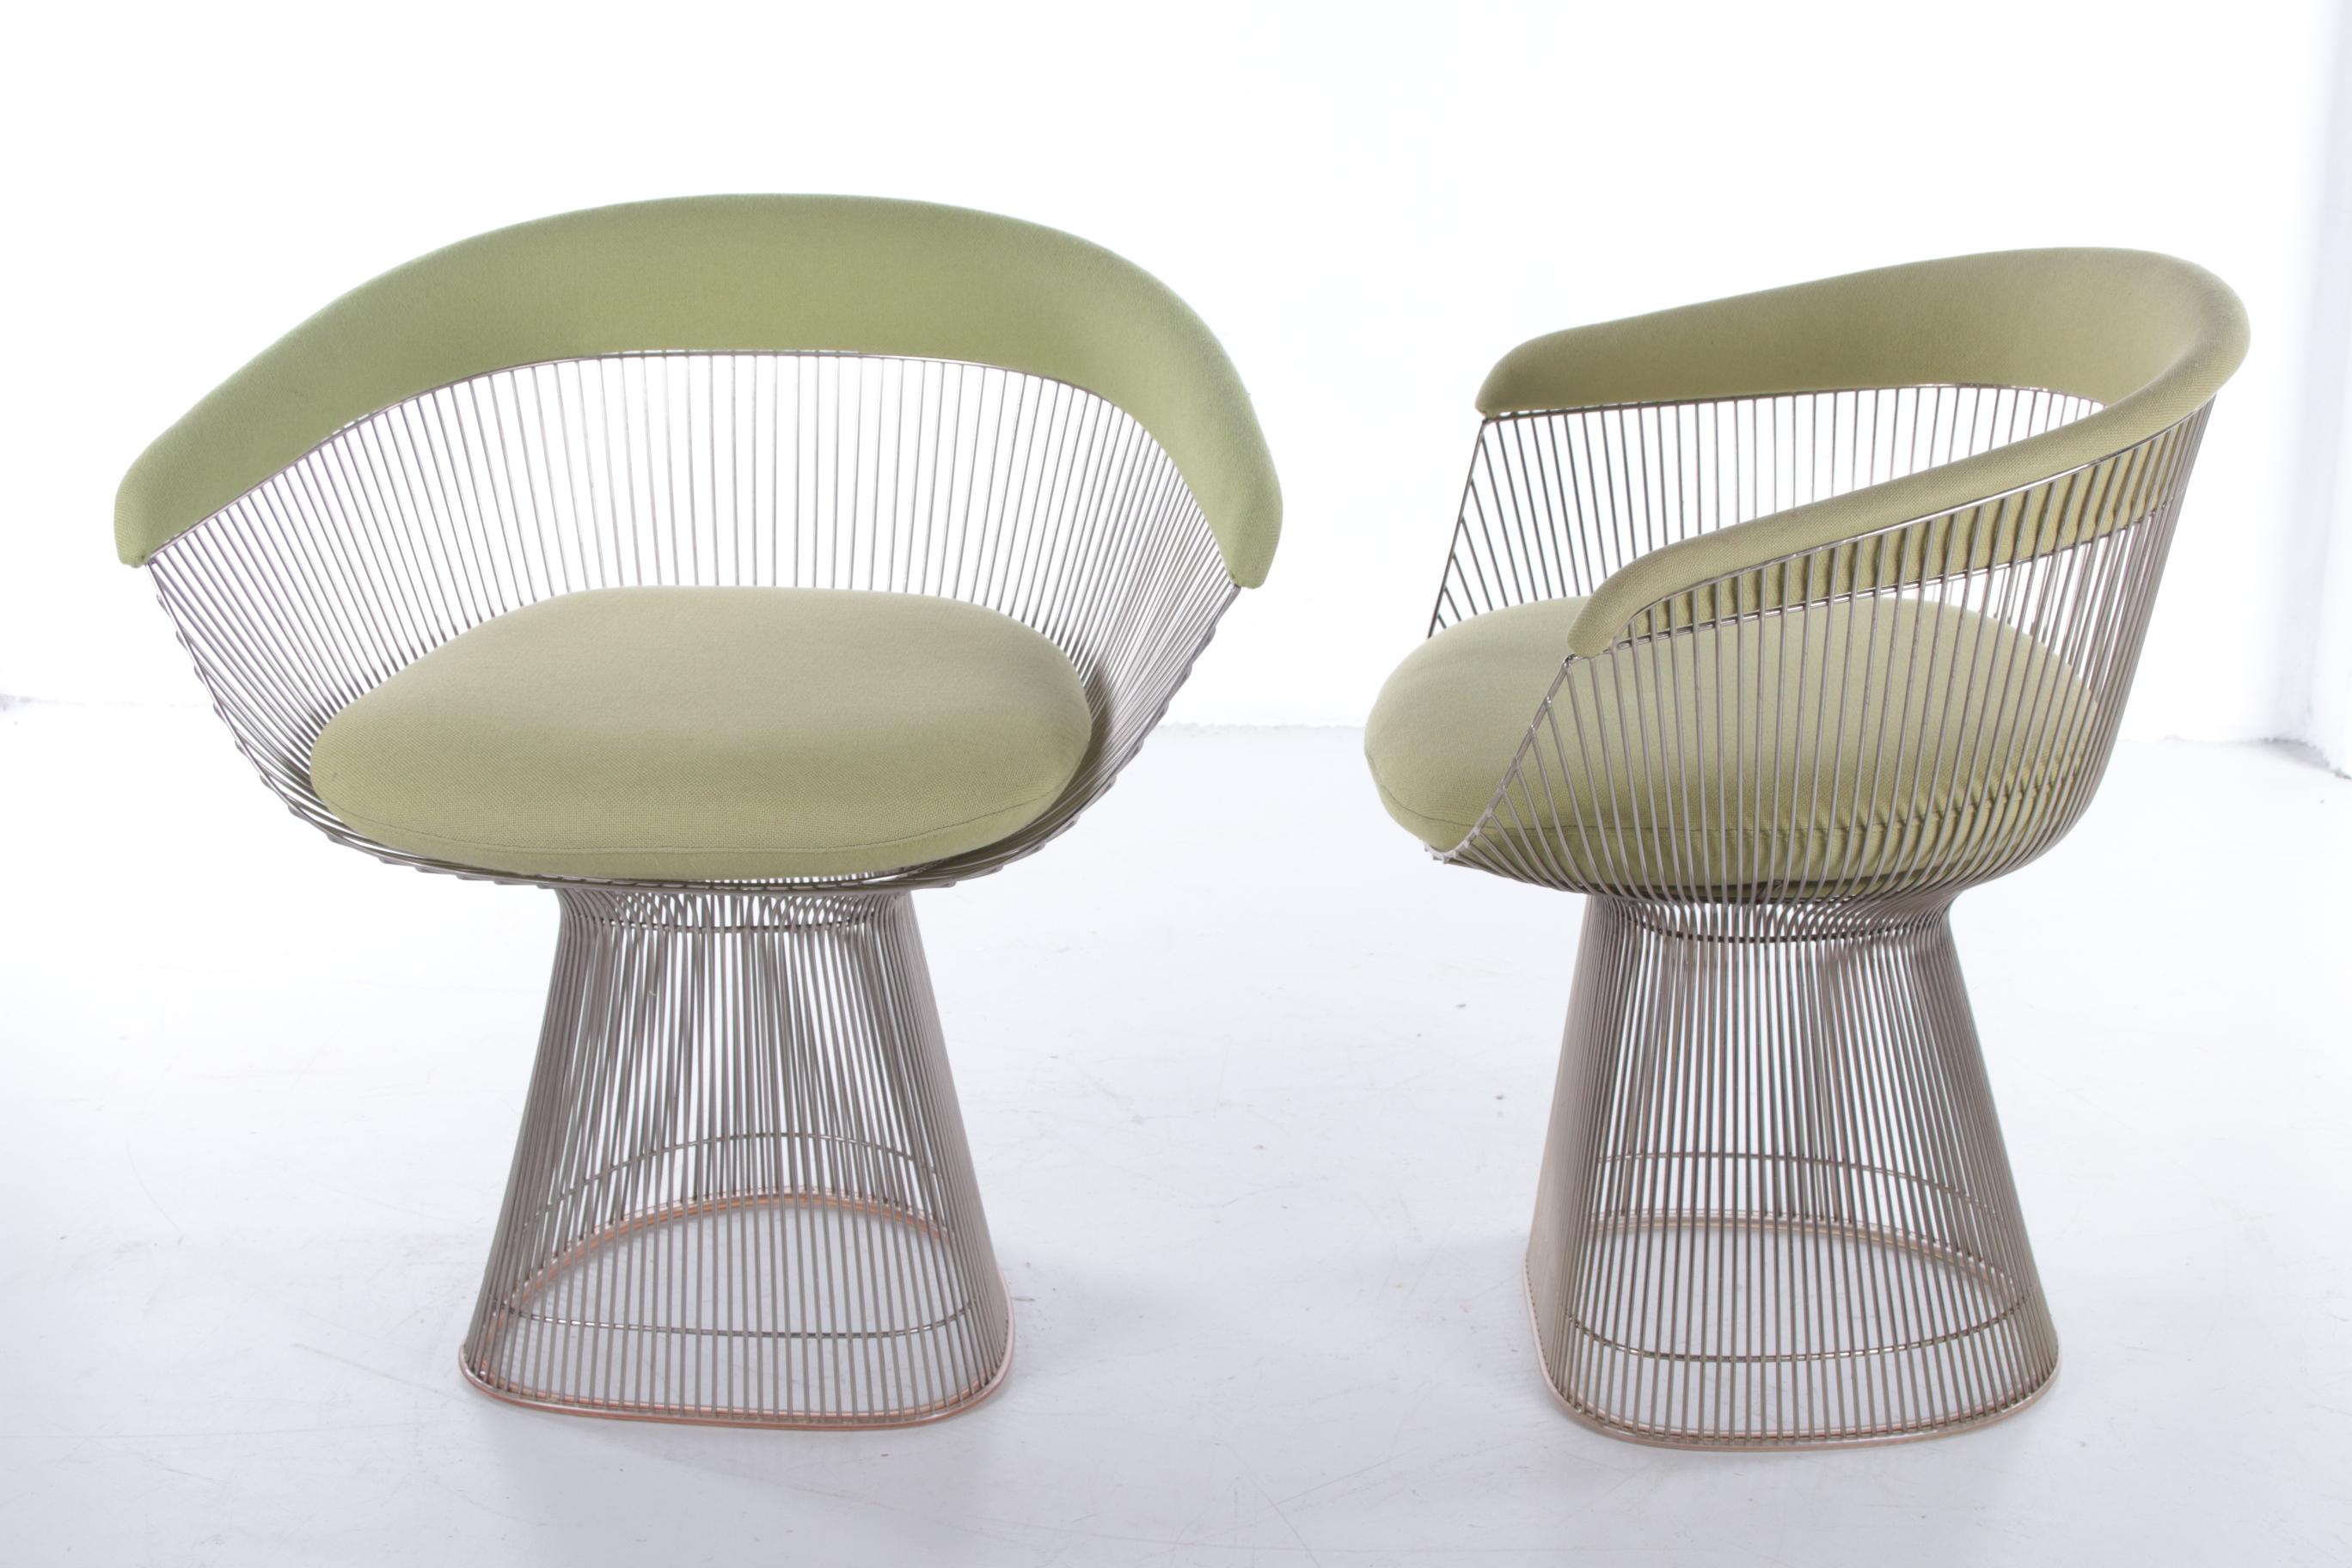 Finally we have a set in our collection! The coveted Warren Platner chairs were designed in 1966 for Knoll.
This model is called Platner Side Chair. Made in 1966

Description

Characteristic of the design within this series is the repetition of